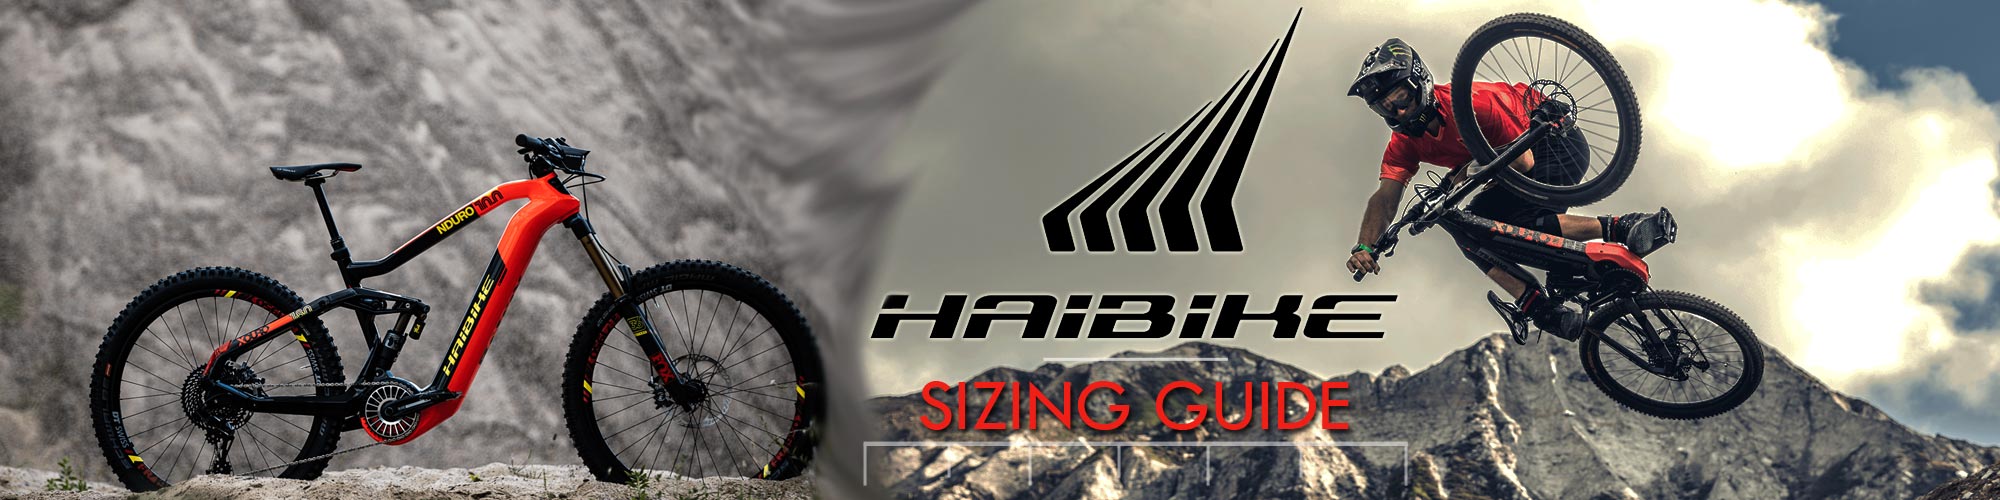 What size Haibike suits you best?